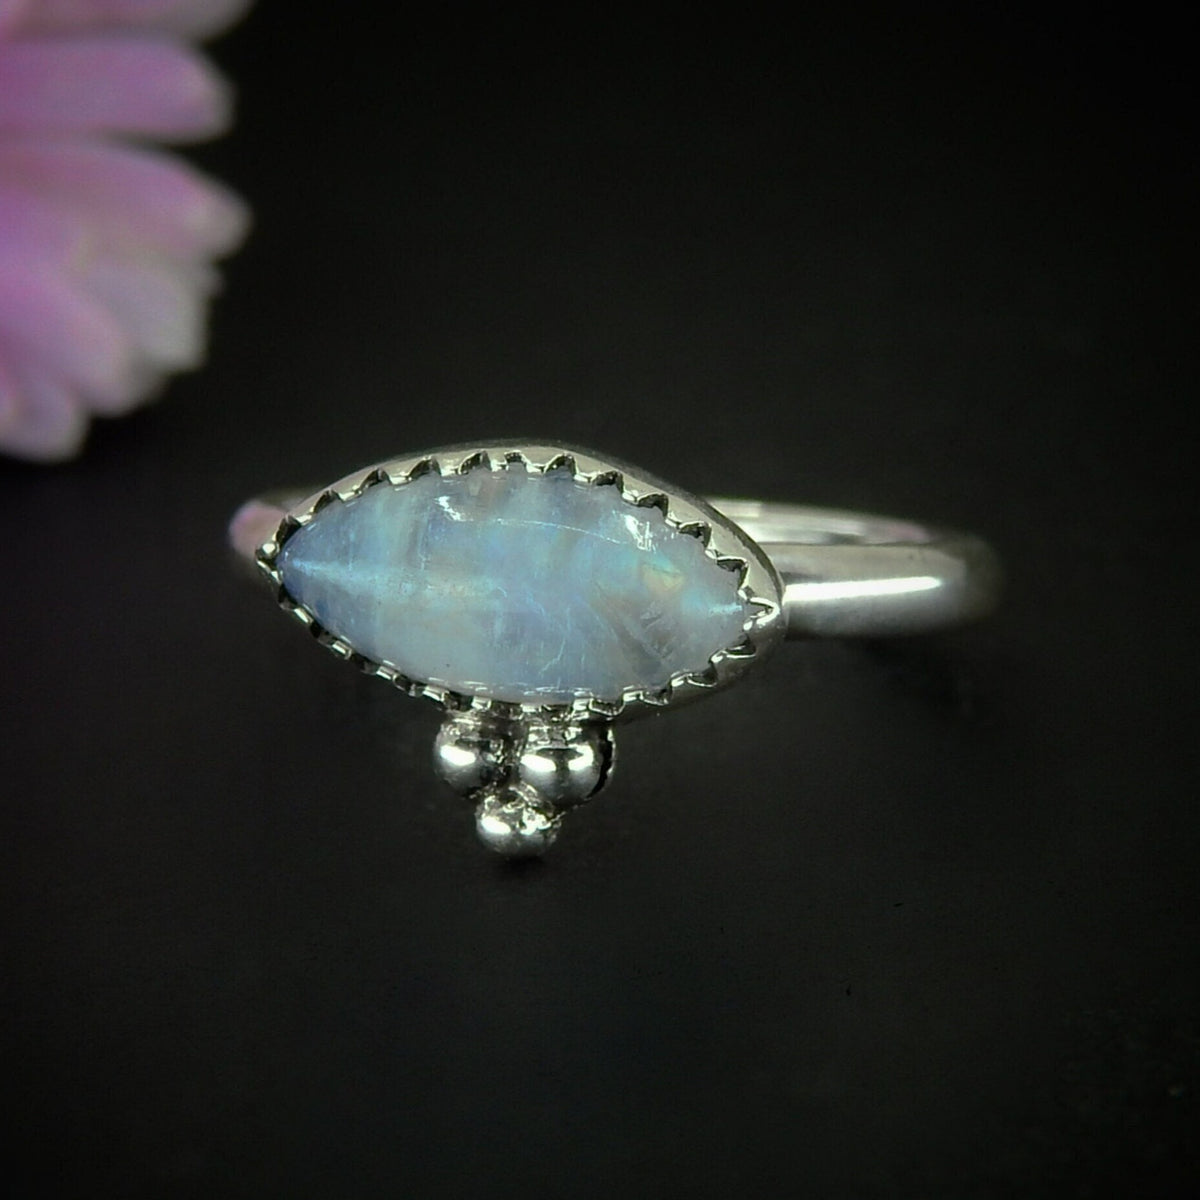 Moonstone Ring - Size 6 to 6 1/4 - Sterling Silver - Rainbow Moonstone Ring - Blue Moonstone Jewelry - OOAK Marquise Dainty Moonstone Ring